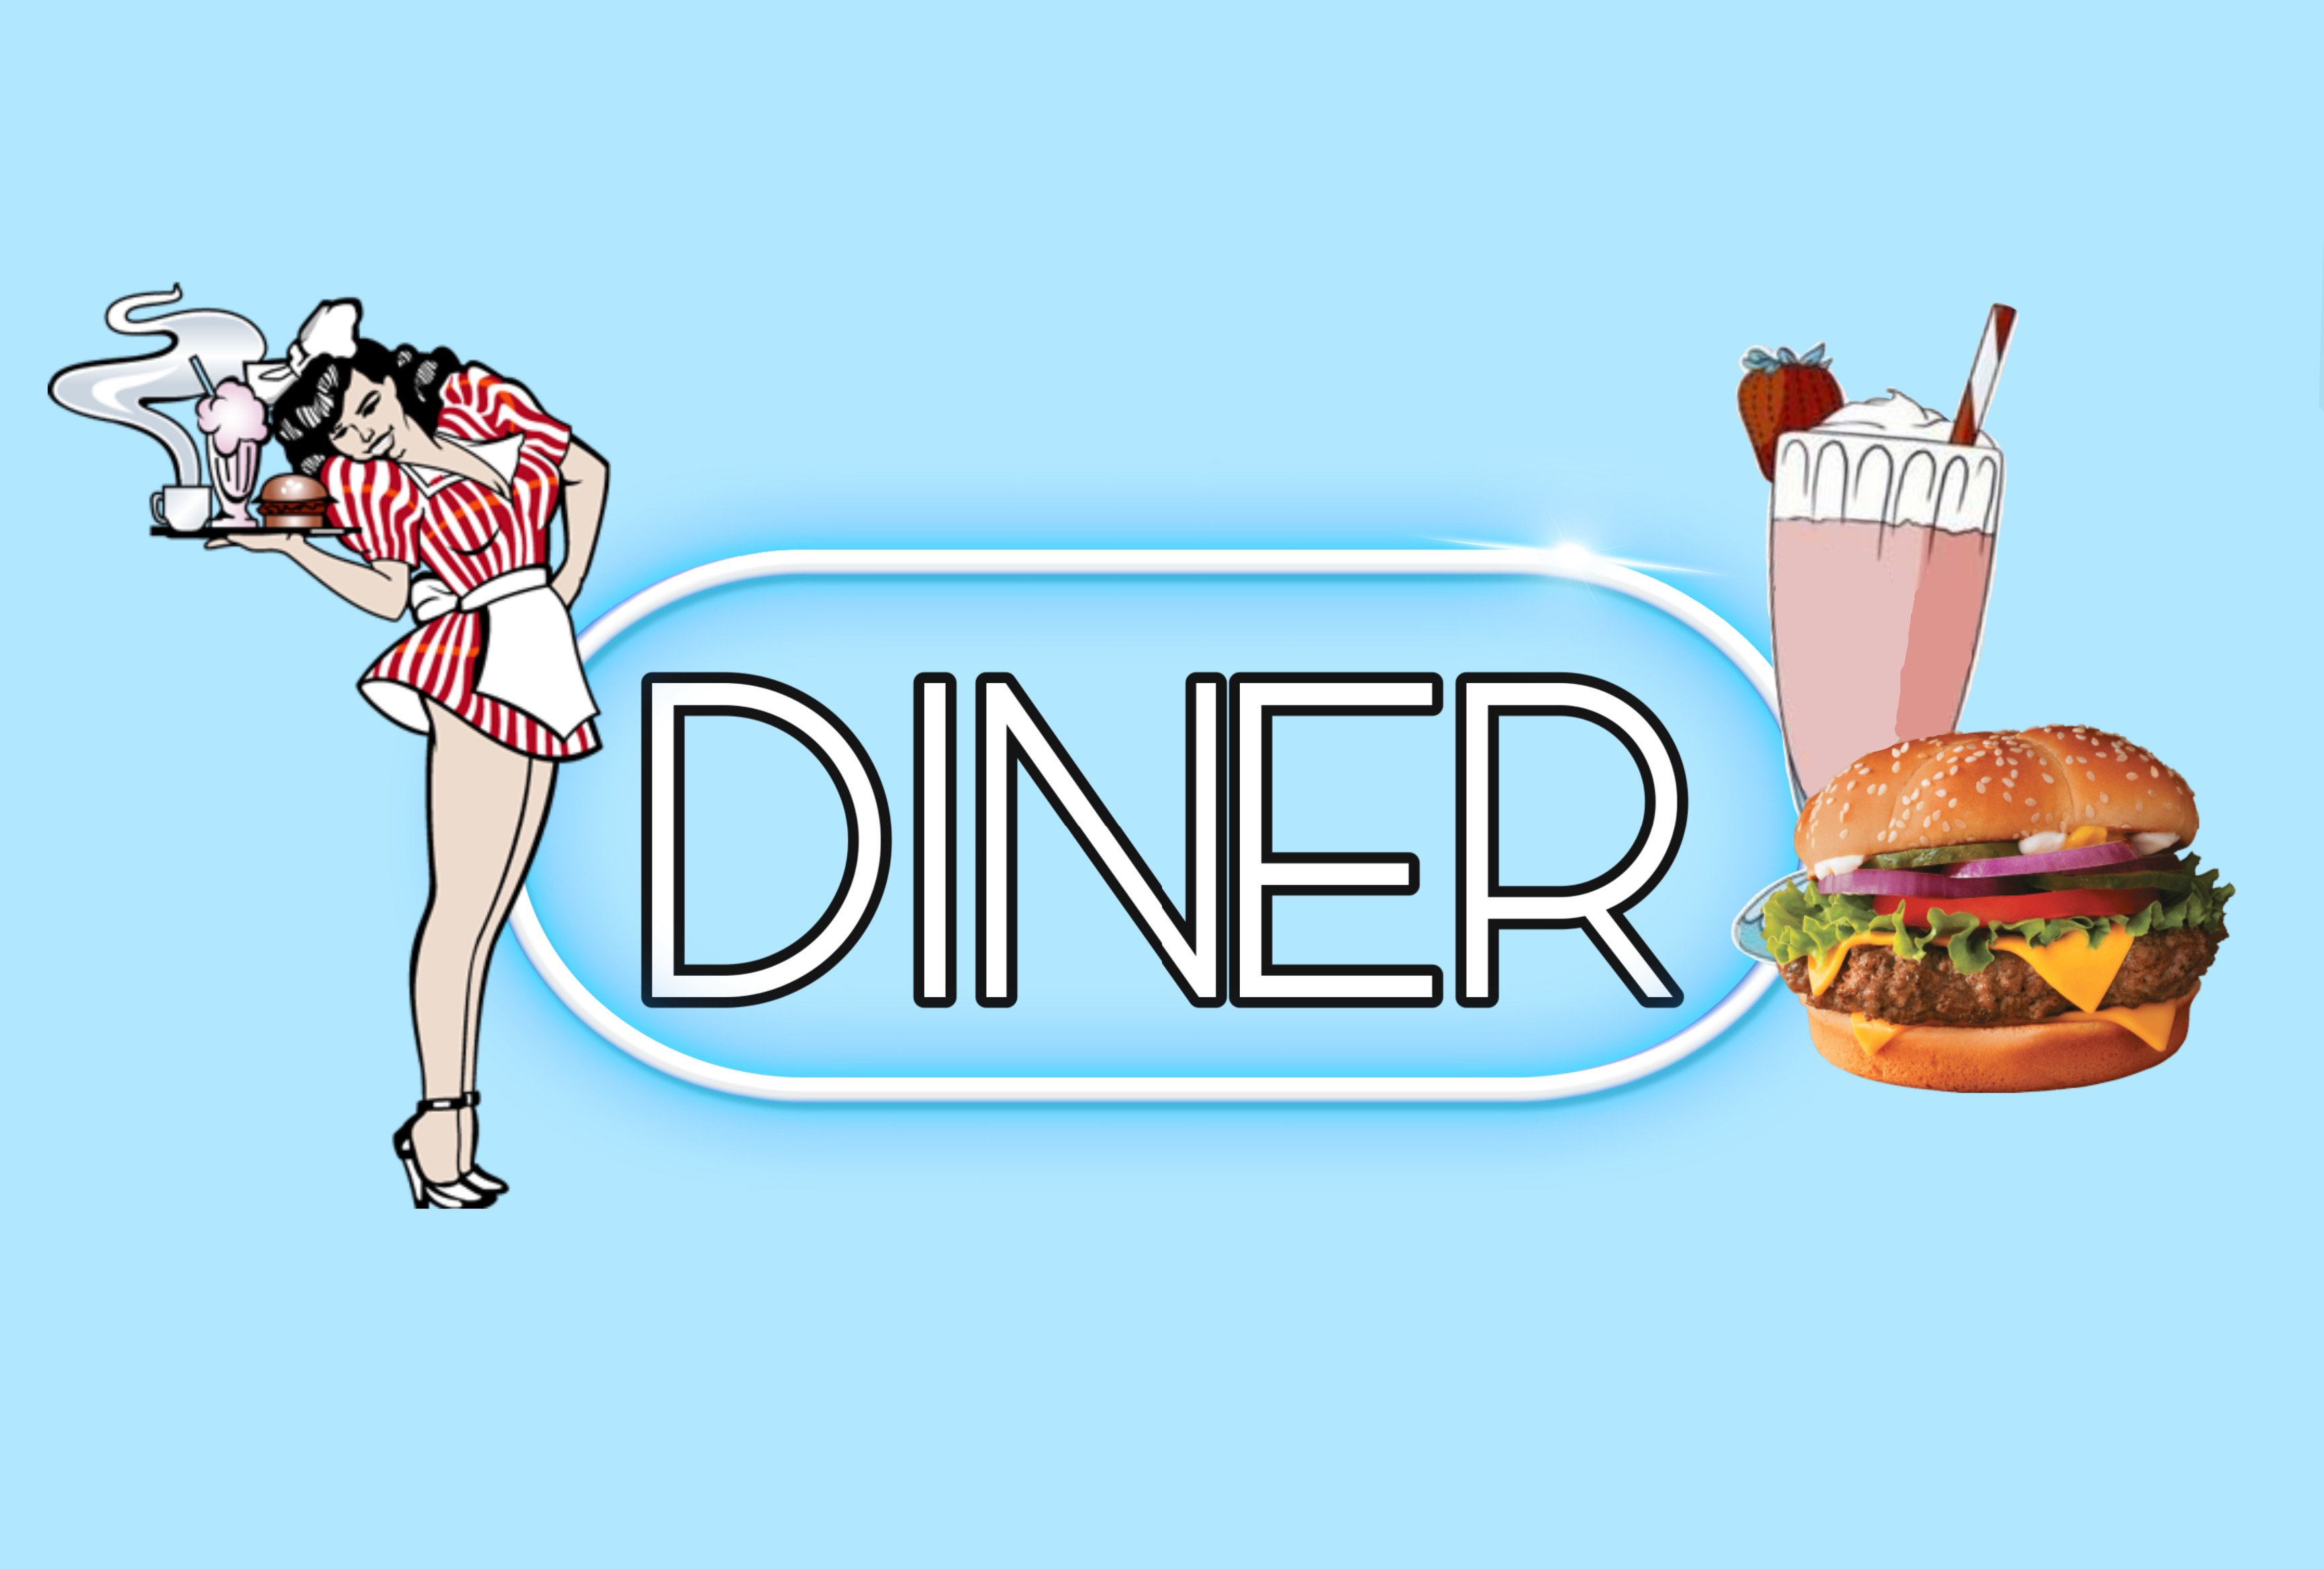 Roblox Bloxburg Decal Diner Cute Image By Velvqt - roblox decals cute